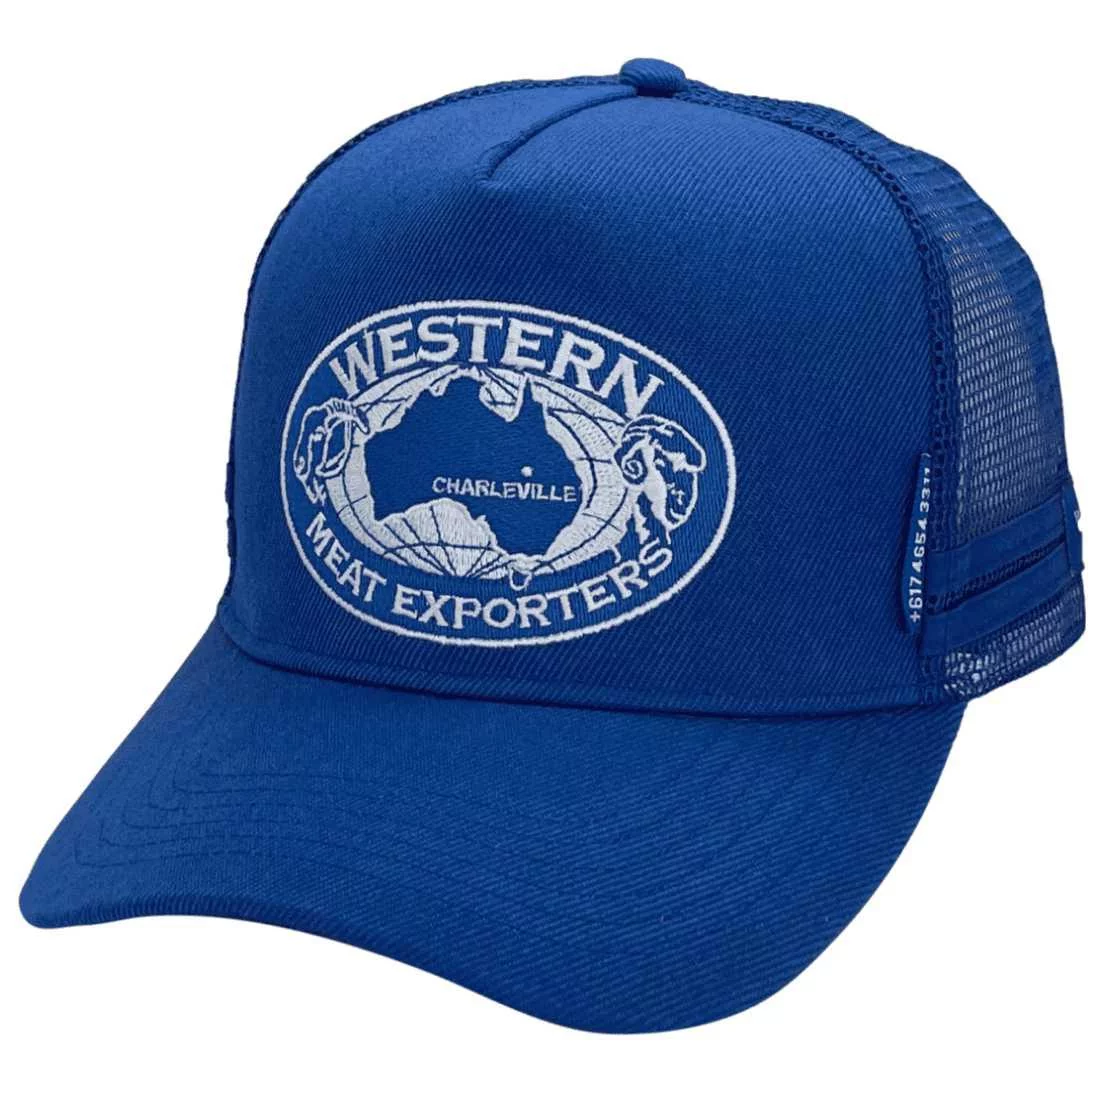 Western Meat Exporters Charleville Qld HP Original Basic Aussie Trucker Hats with Australian Head Fit Crown Size and 2 Sidebands Royal Blue